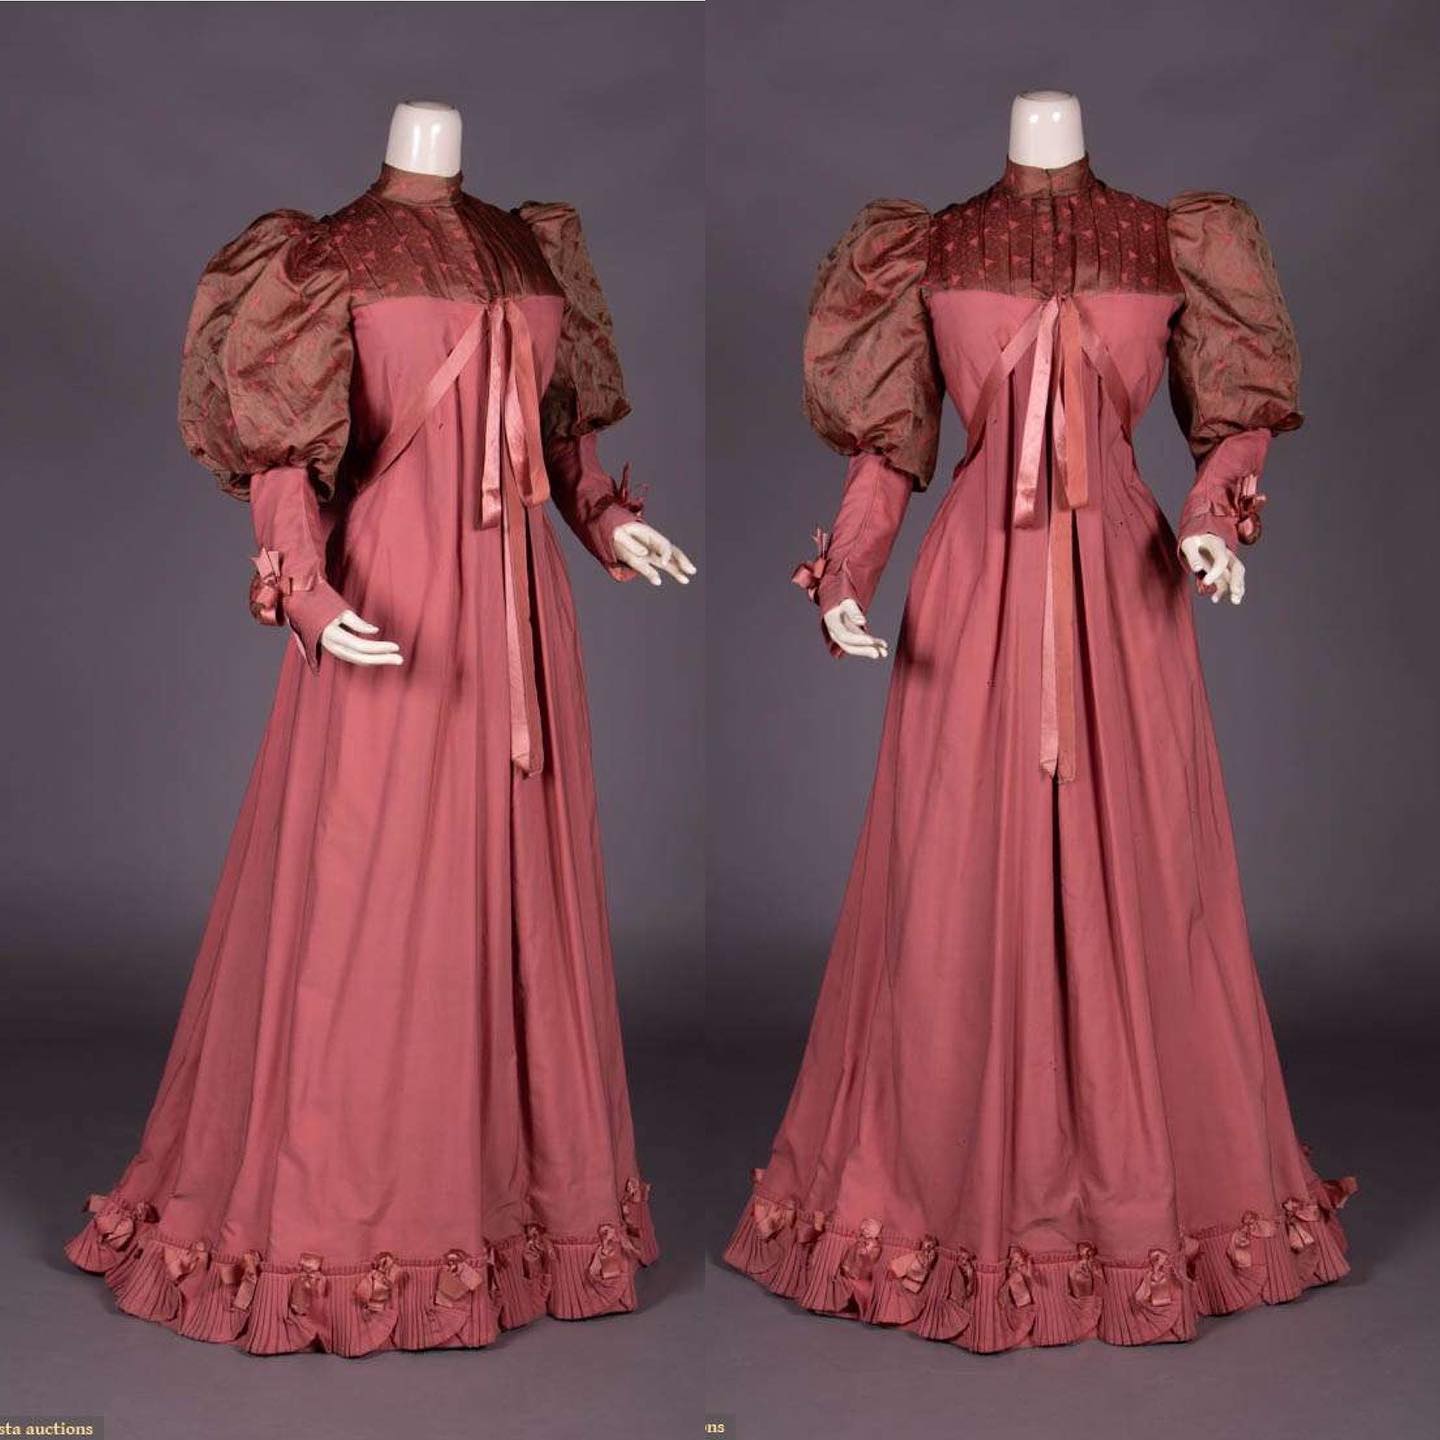 Image shows two front angles of an aesthetic movement tea gown in dusty rose pink, with brown-pink gigot sleeves